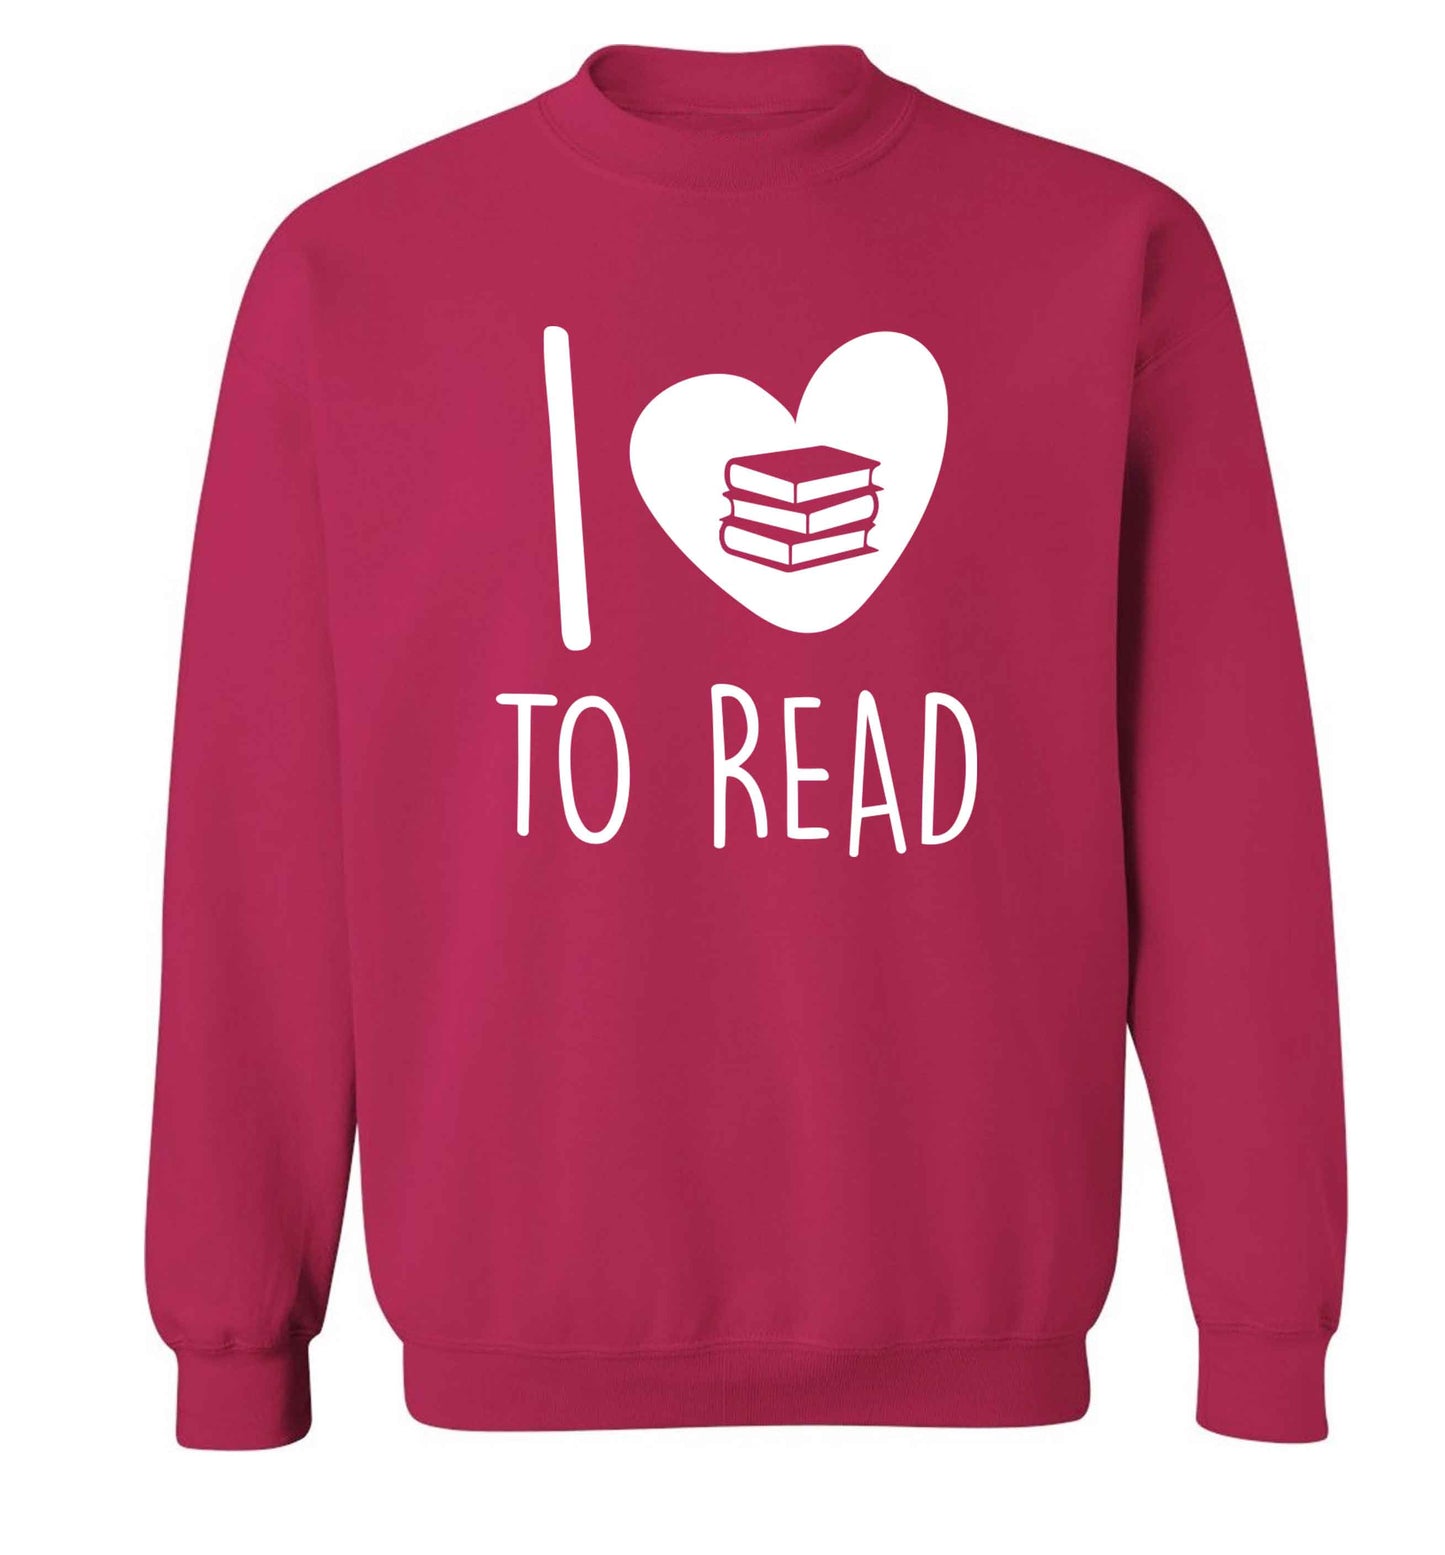 I love to read Adult's unisex pink Sweater 2XL